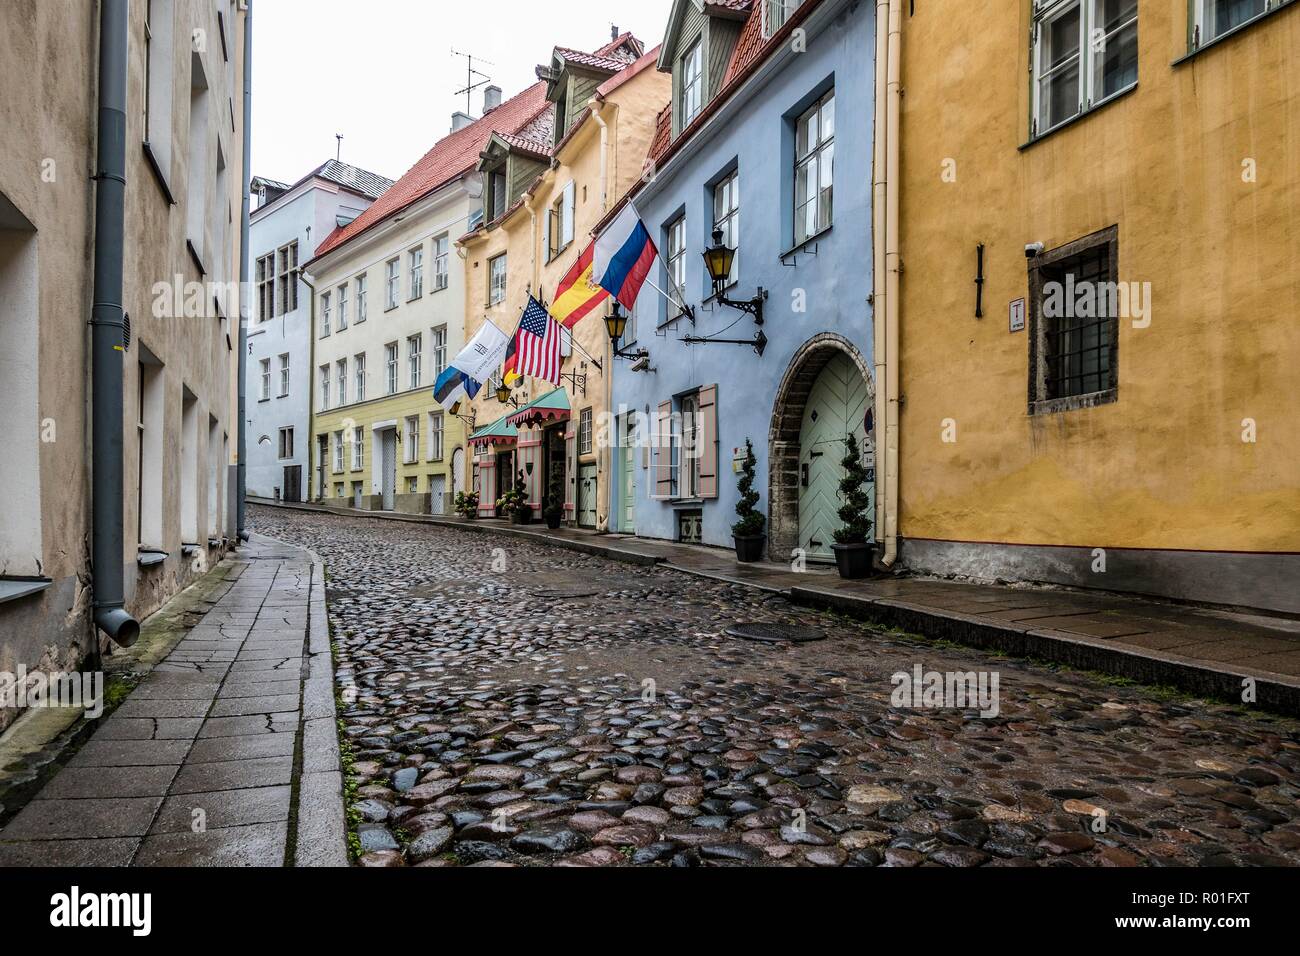 ESTONIA, TALLINN. The Capital of Estonia has one of the most attractive historic city centers of the Baltic states. Stock Photo